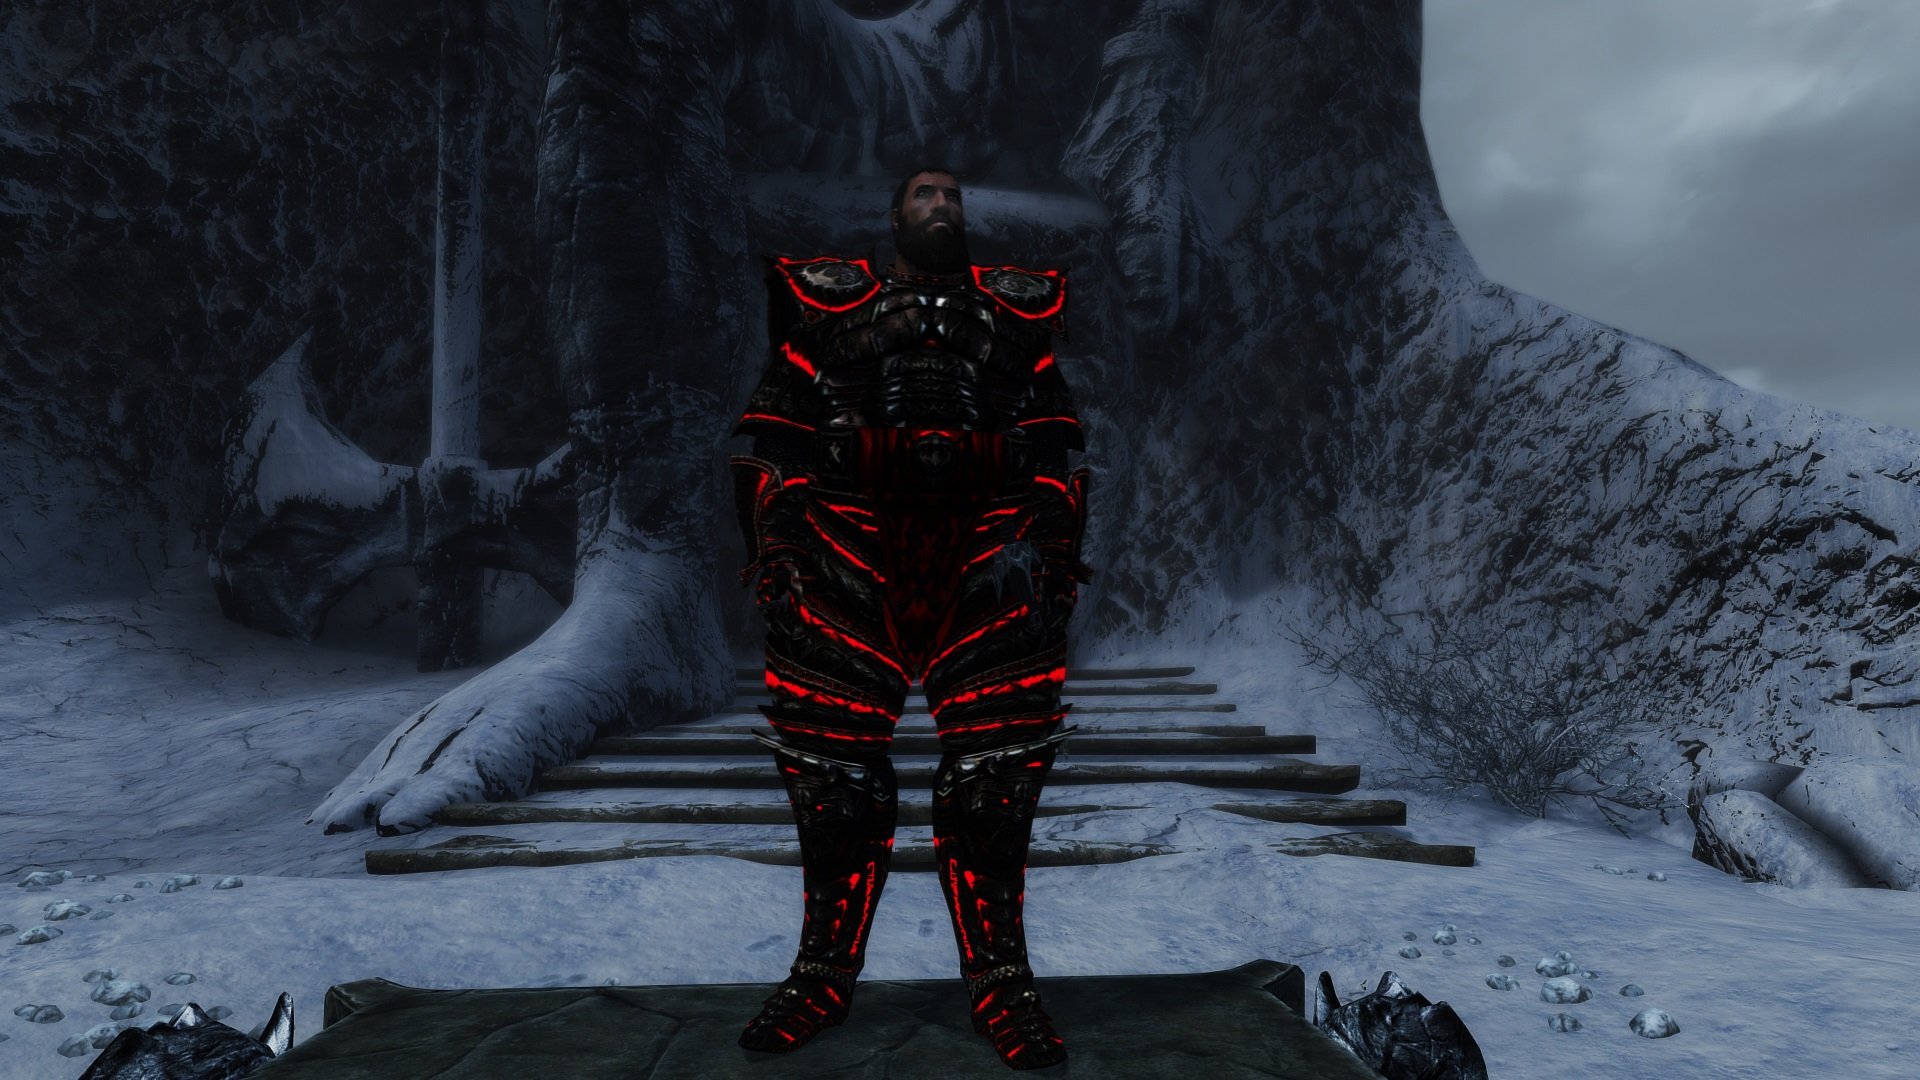 Legacy of the Dragonborn refit armors for SAM